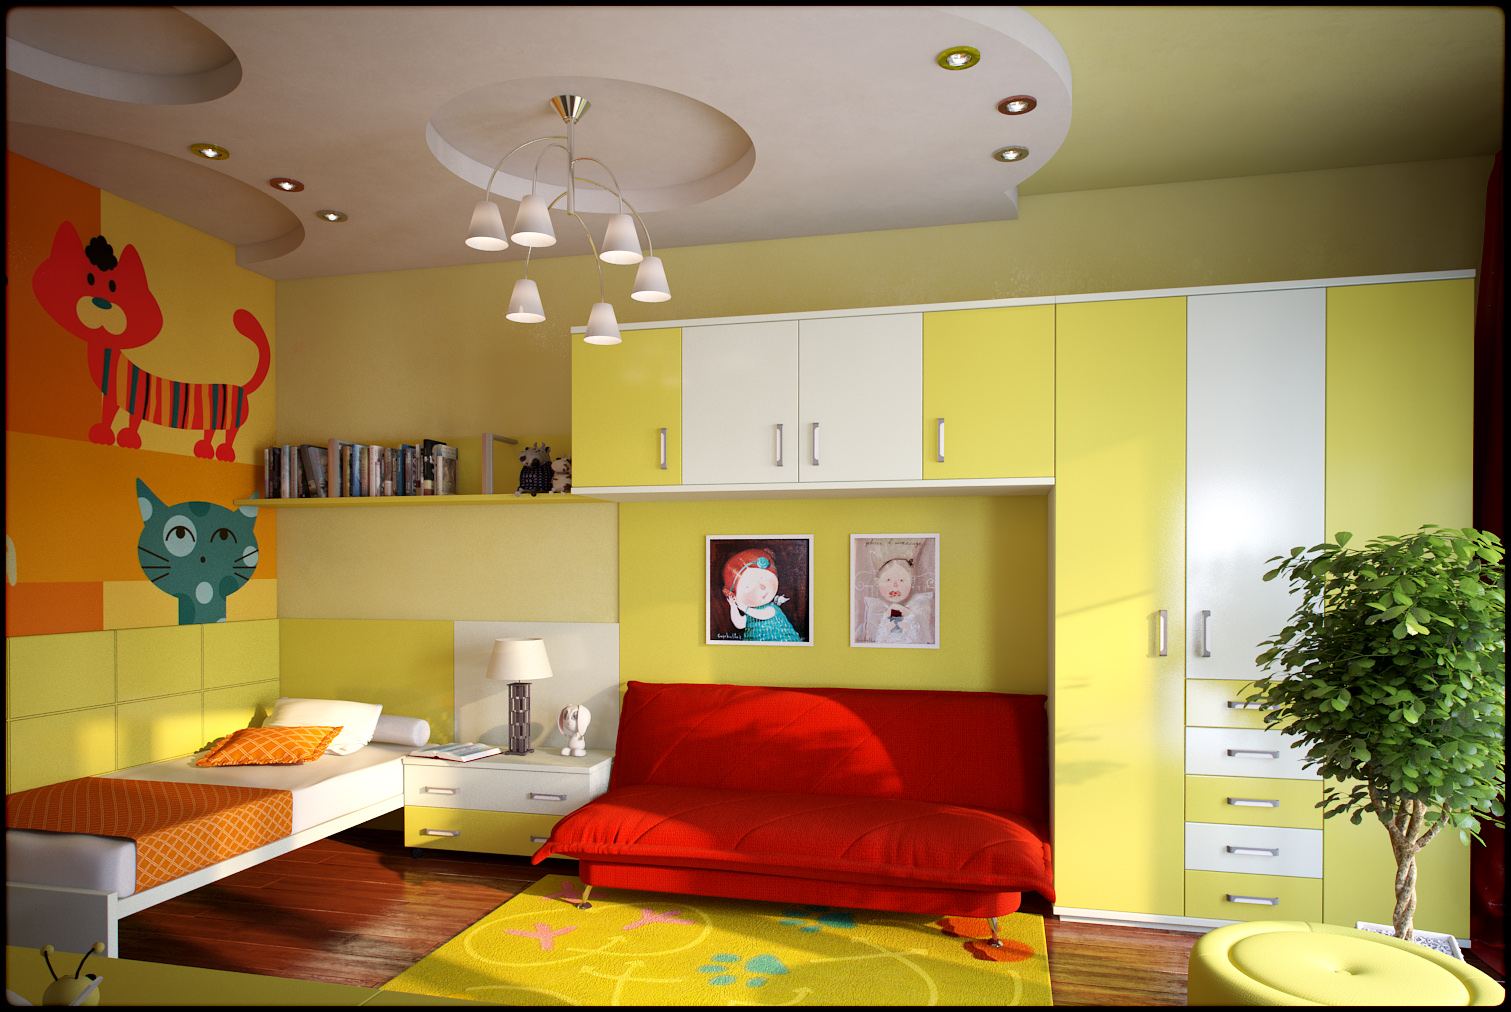 the idea of ​​using beautiful yellow in the decor of the room